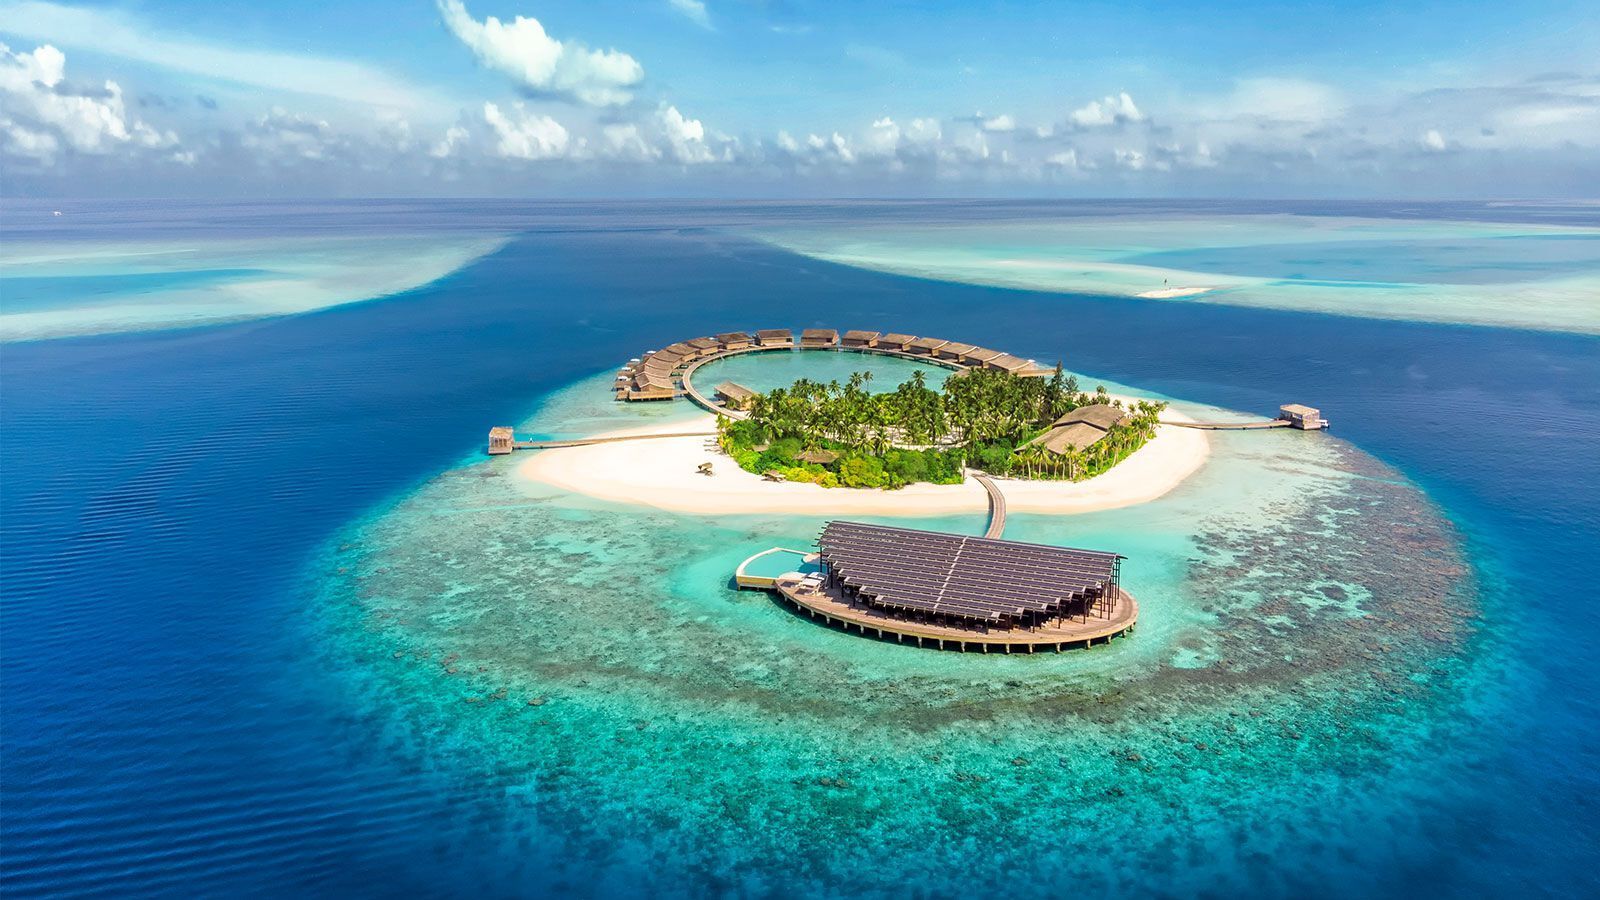 Top 10 most expensive hotels in the world that make luxury vacations worth the money